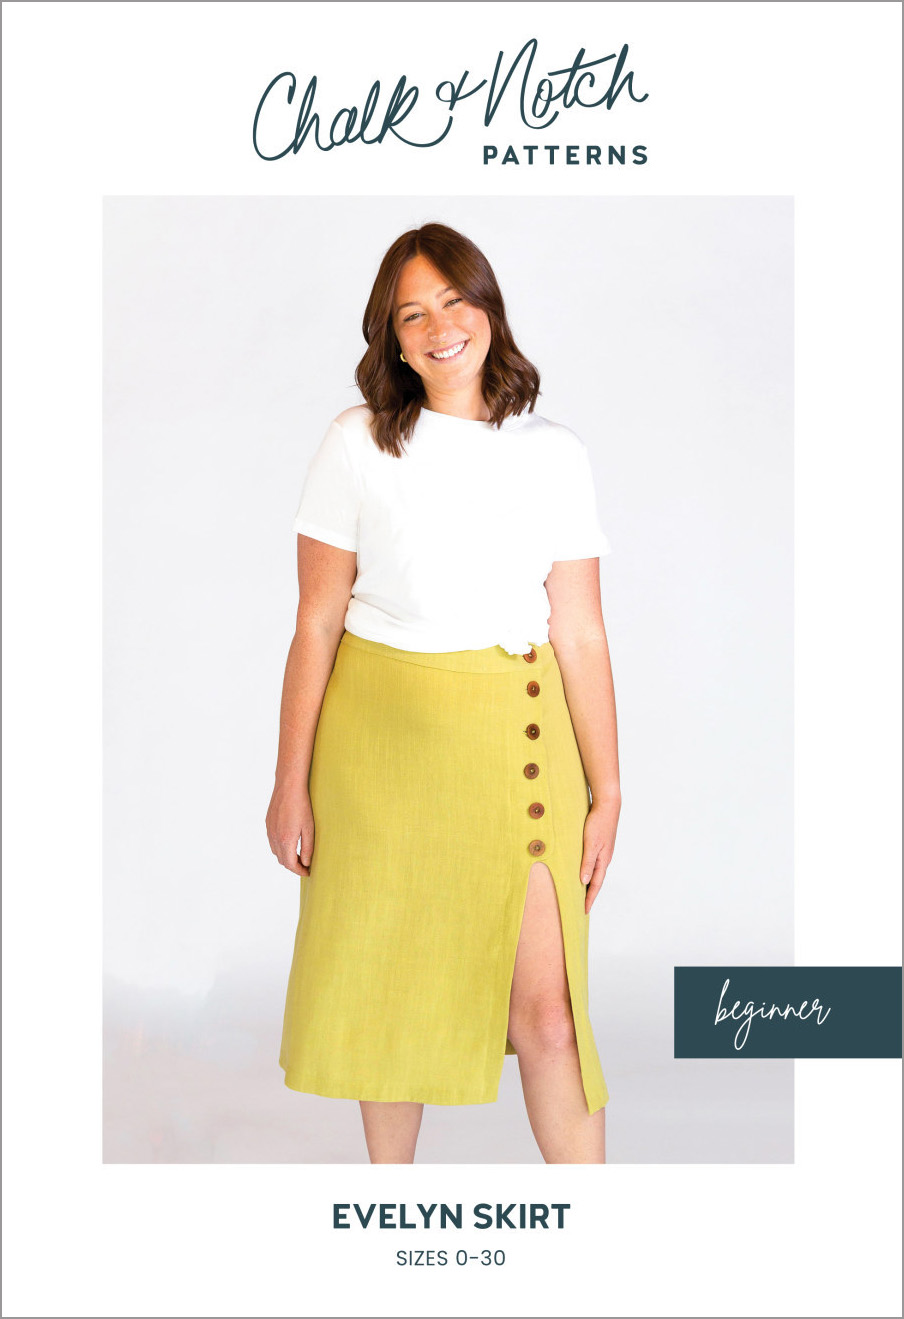 Evelyn Skirt By Chalk and Notch Patterns